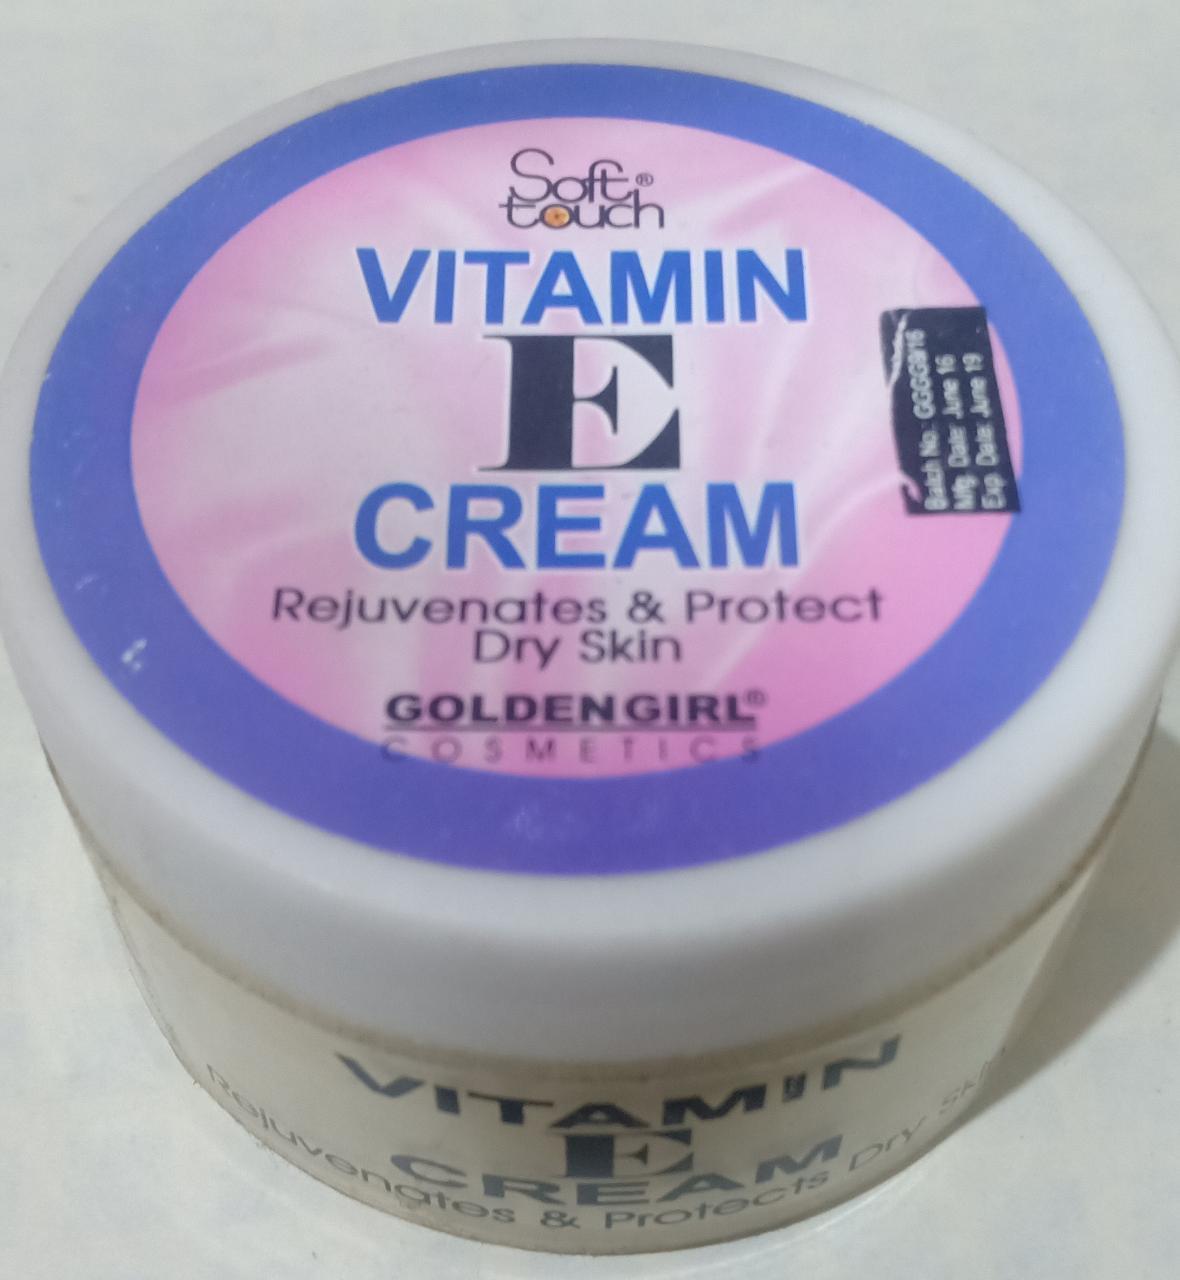 Soft Touch Vitamin E Cream Buy Online At Best Prices In Pakistan Daraz Pk